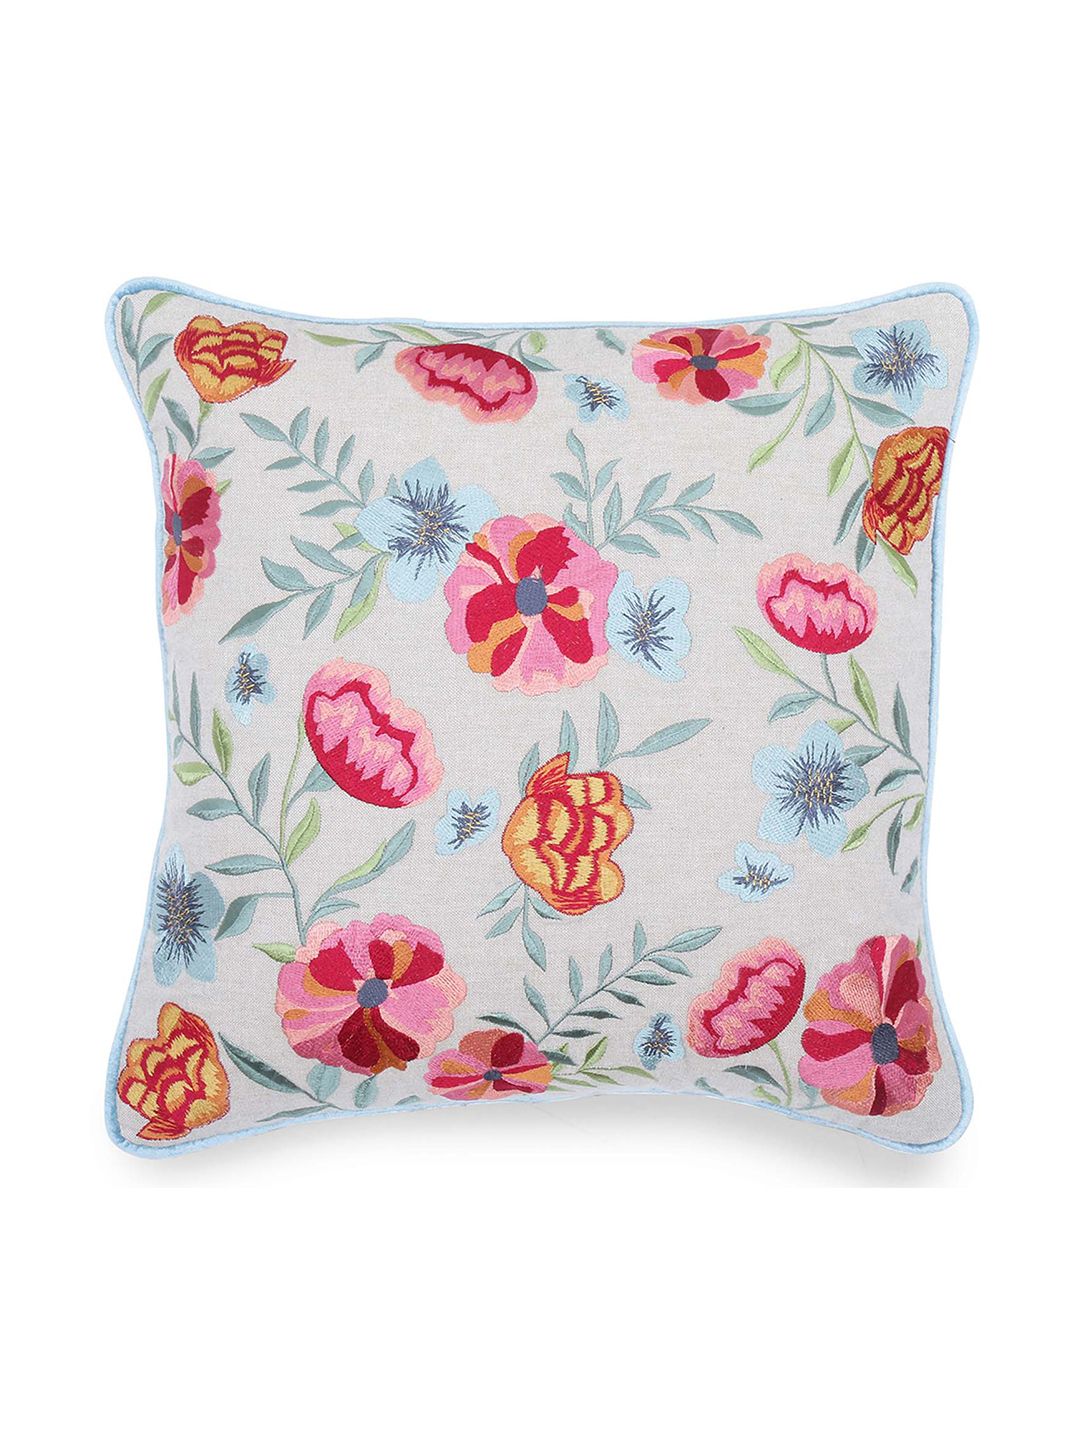 haus & kinder White & Red Floral Square Cushion Covers Price in India